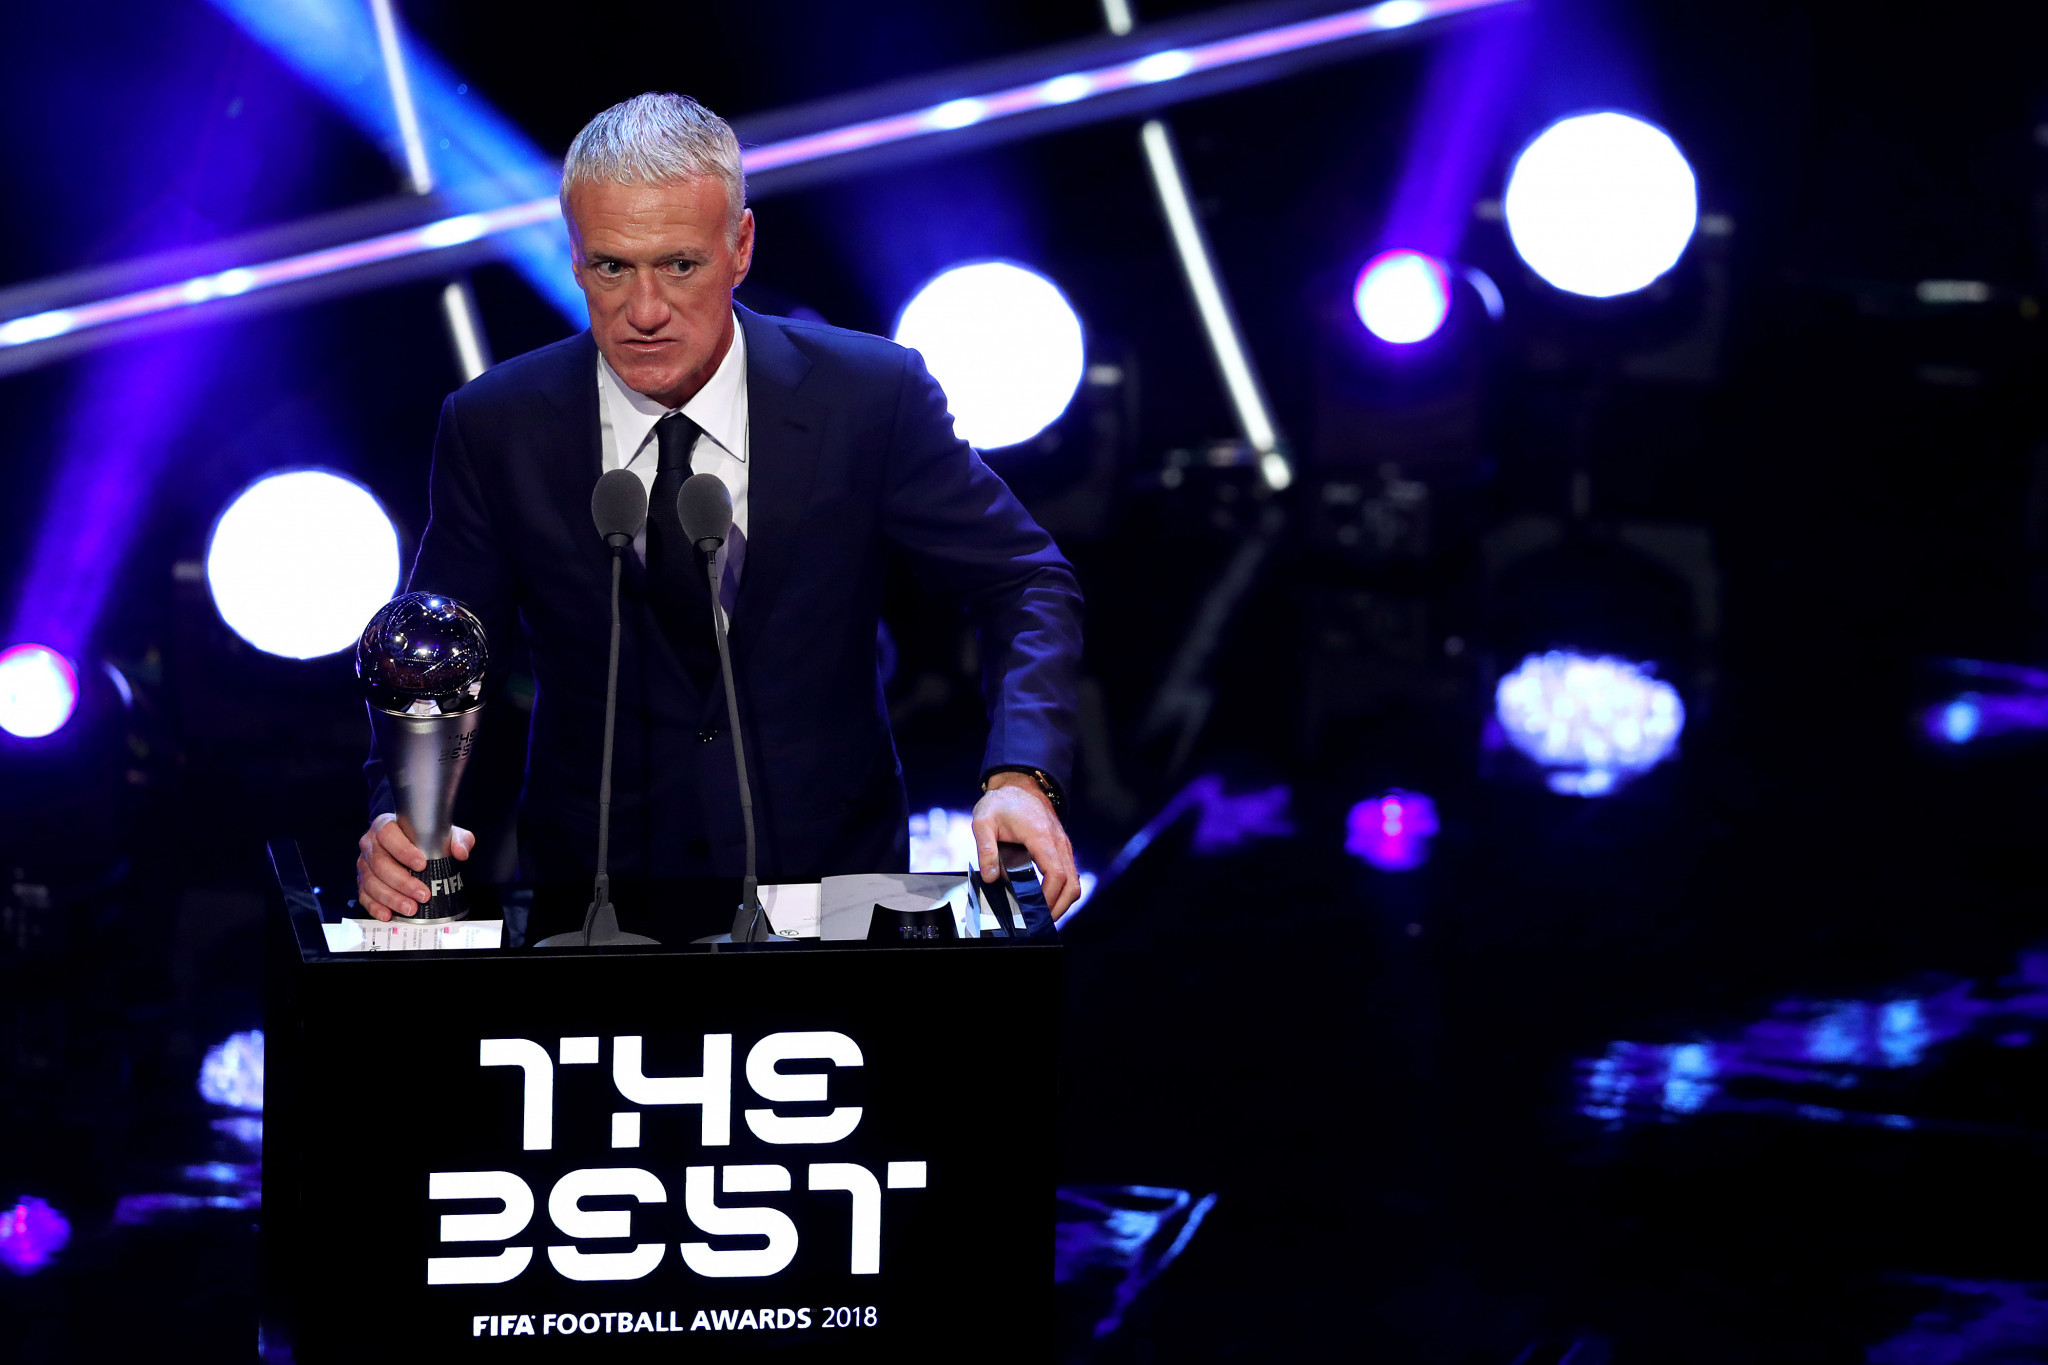 Didier Deschamps was named best men's coach after guiding France to the World Cup ©Getty Images